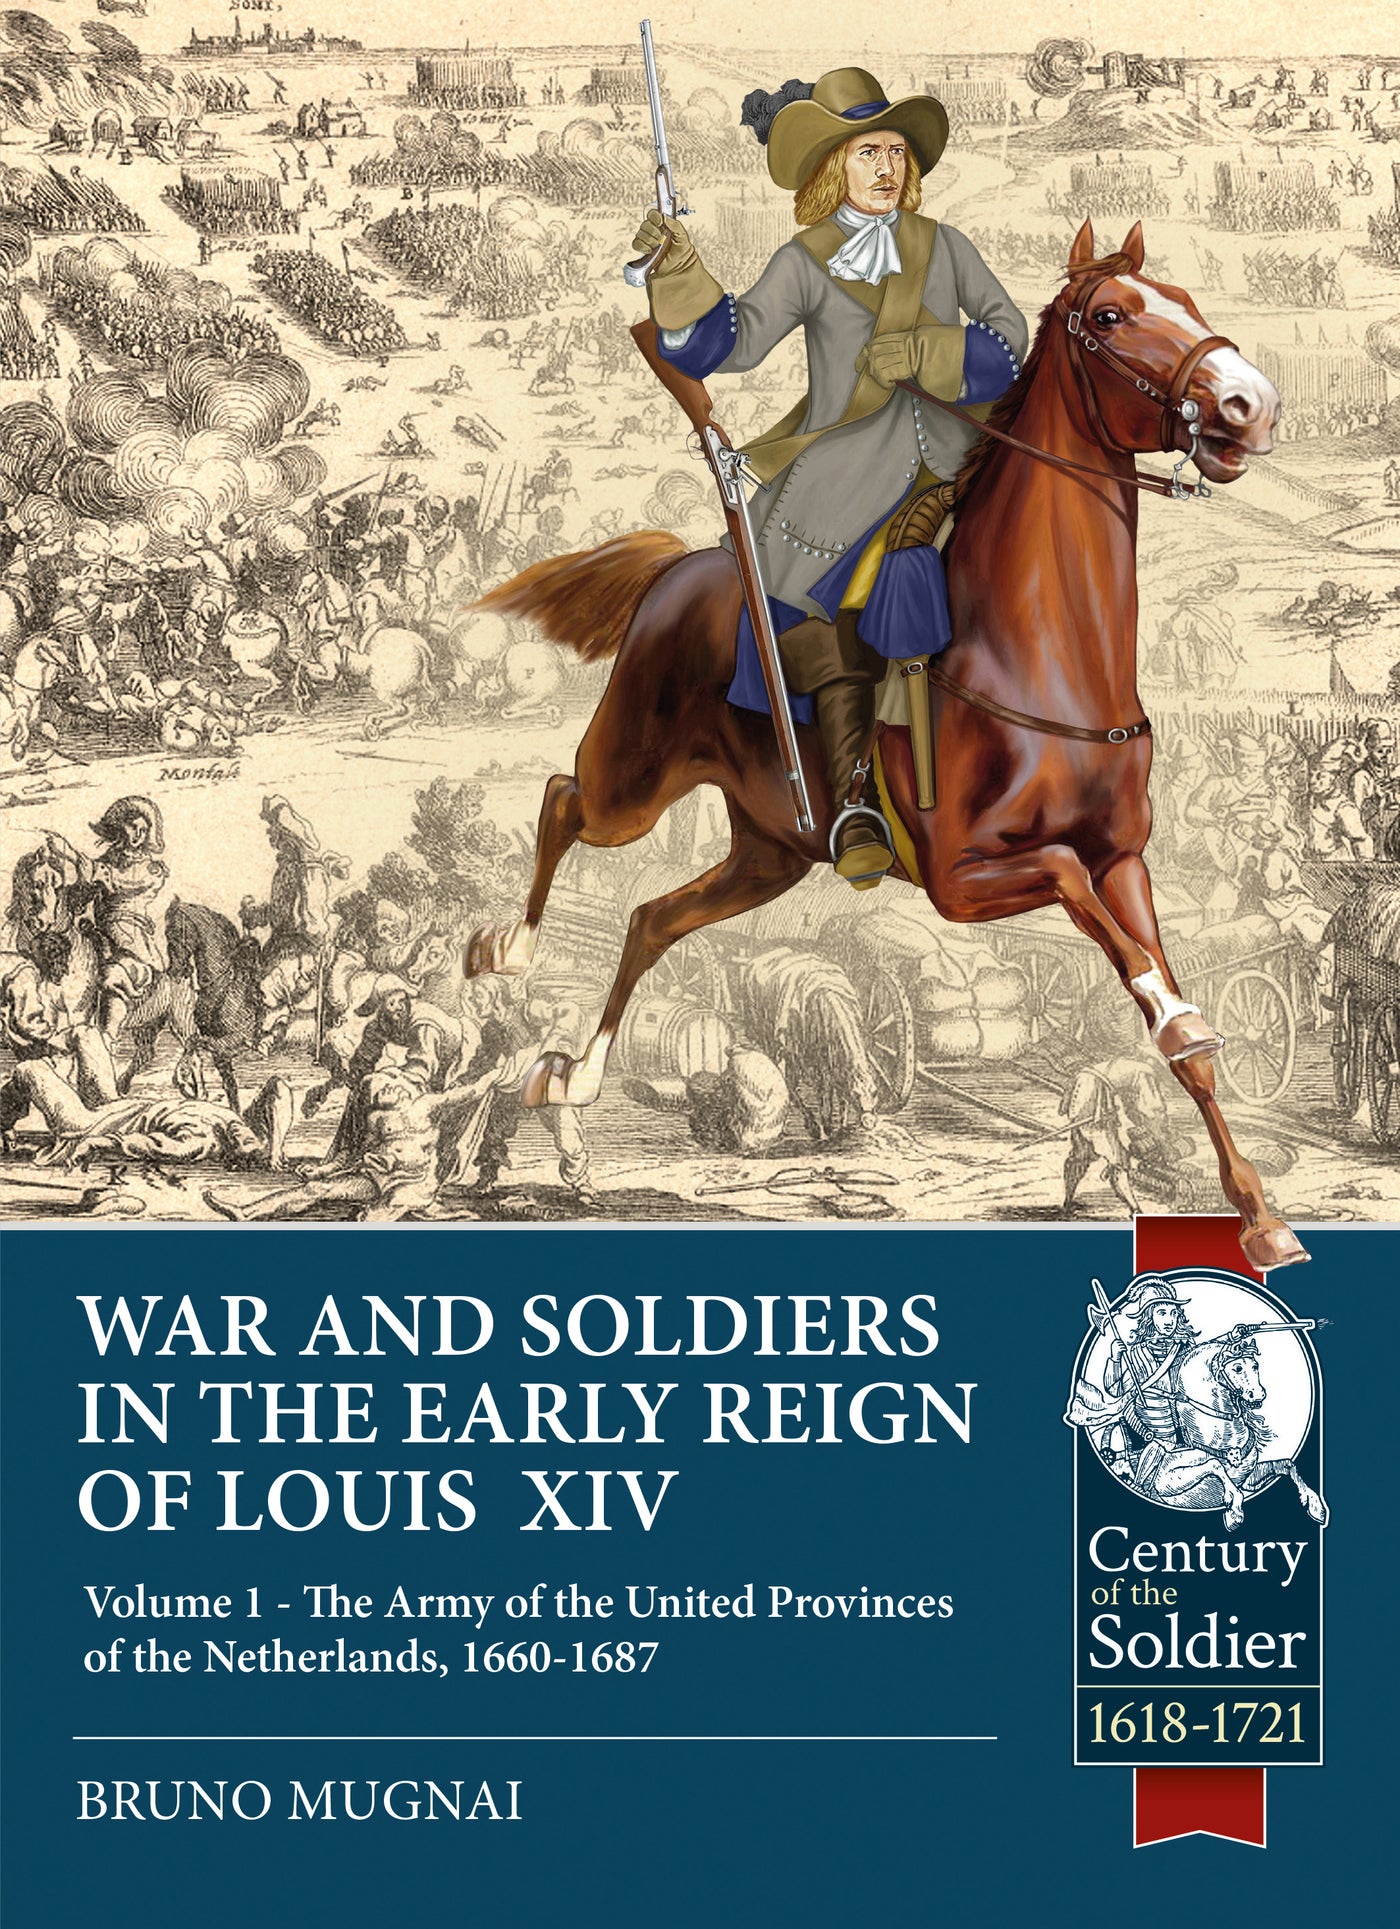 War and Soldiers in the Early Reign of Louis XIV